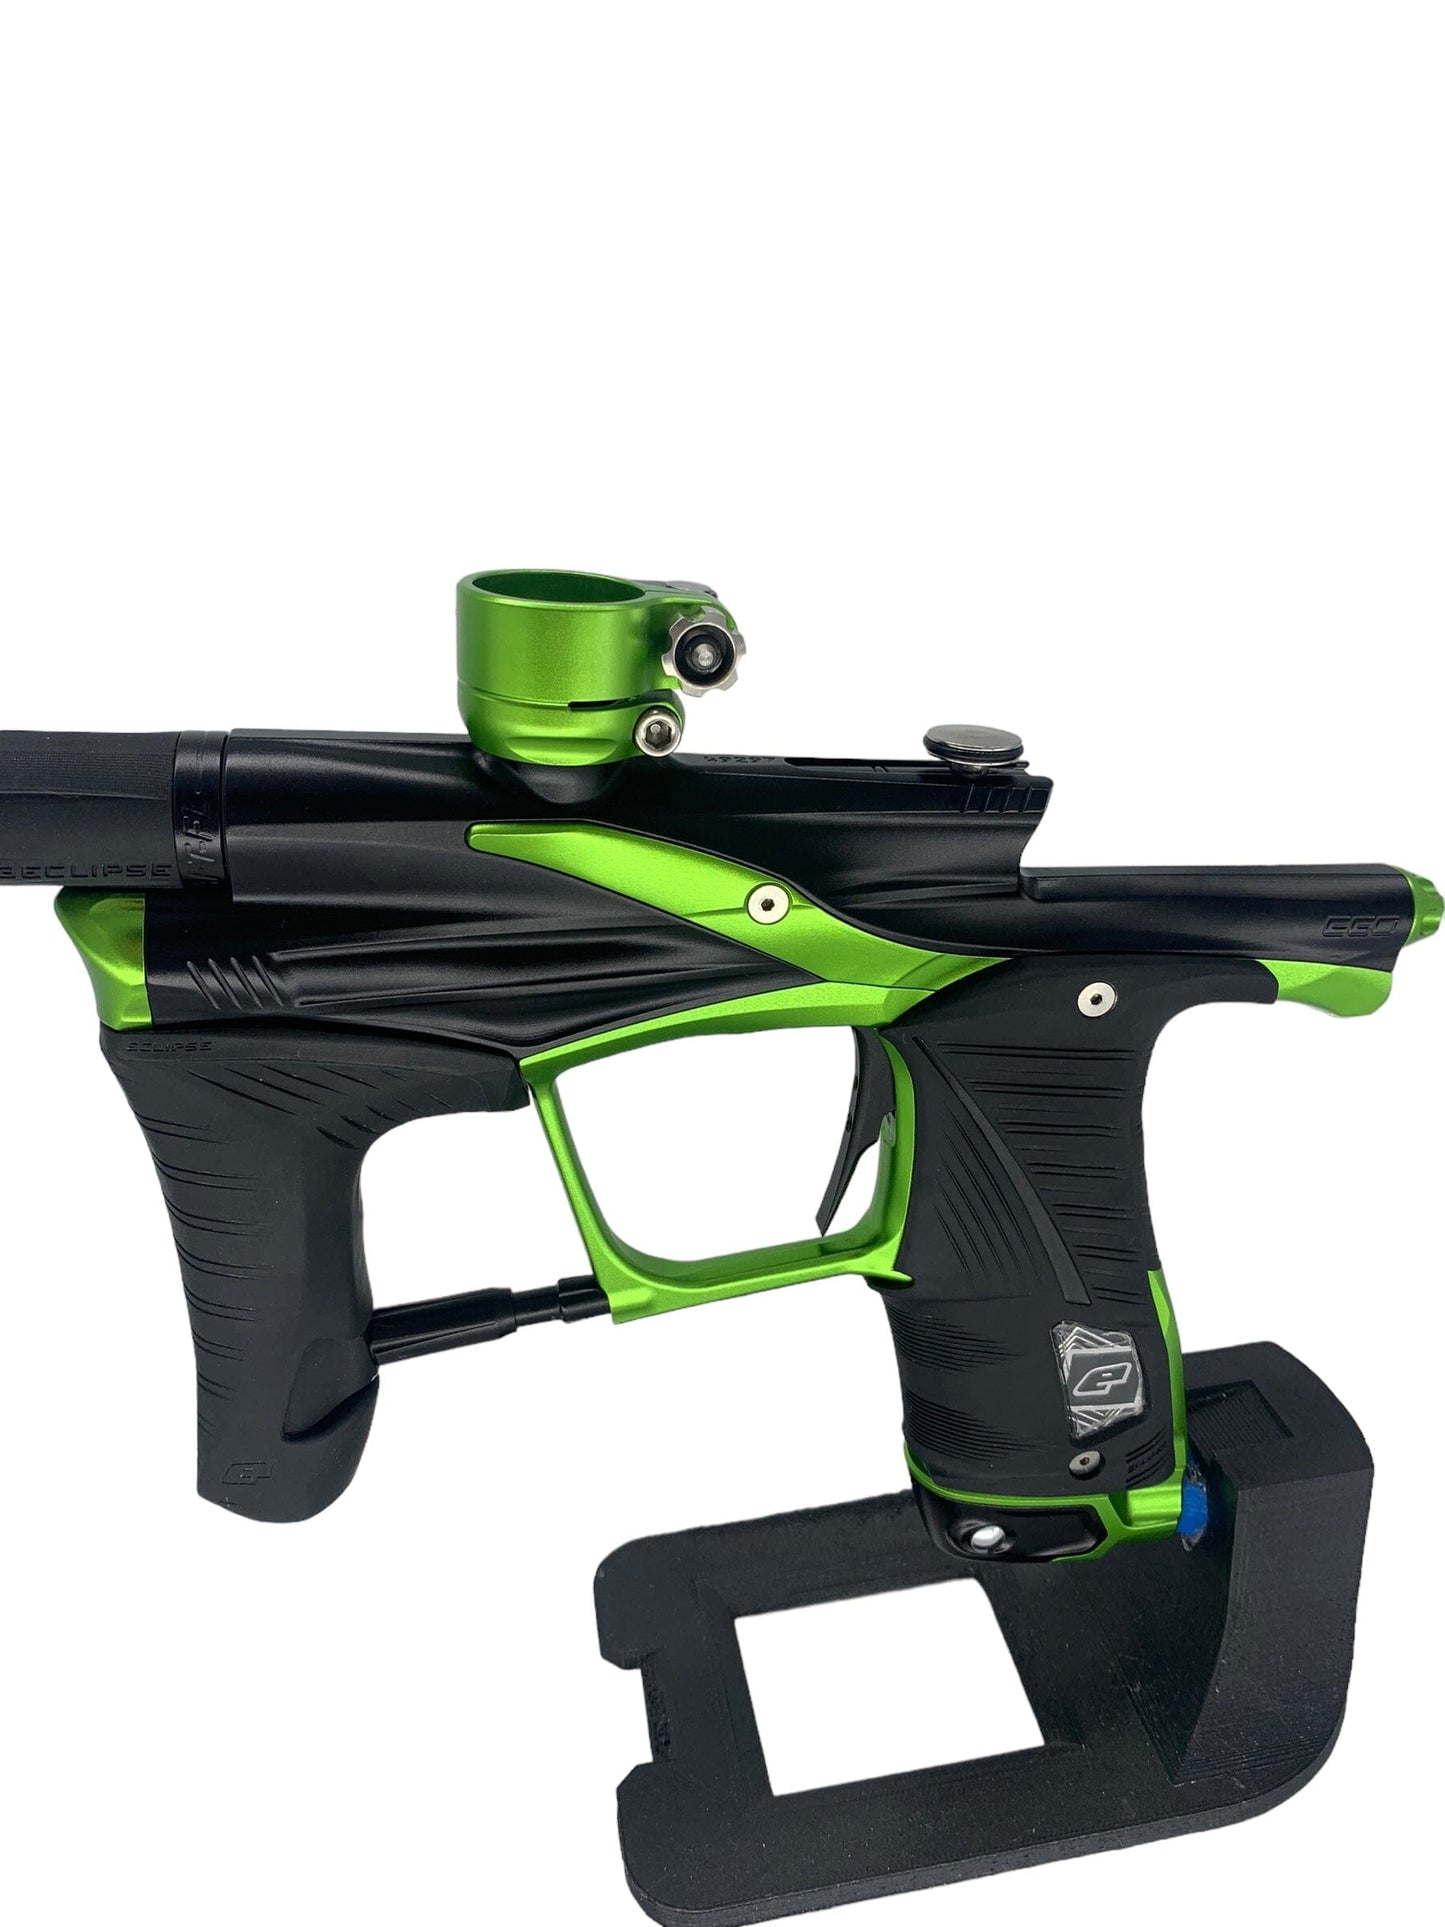 Used Planet Eclipse Lv1.6 Paintball Gun Paintball Gun from CPXBrosPaintball Buy/Sell/Trade Paintball Markers, New Paintball Guns, Paintball Hoppers, Paintball Masks, and Hormesis Headbands